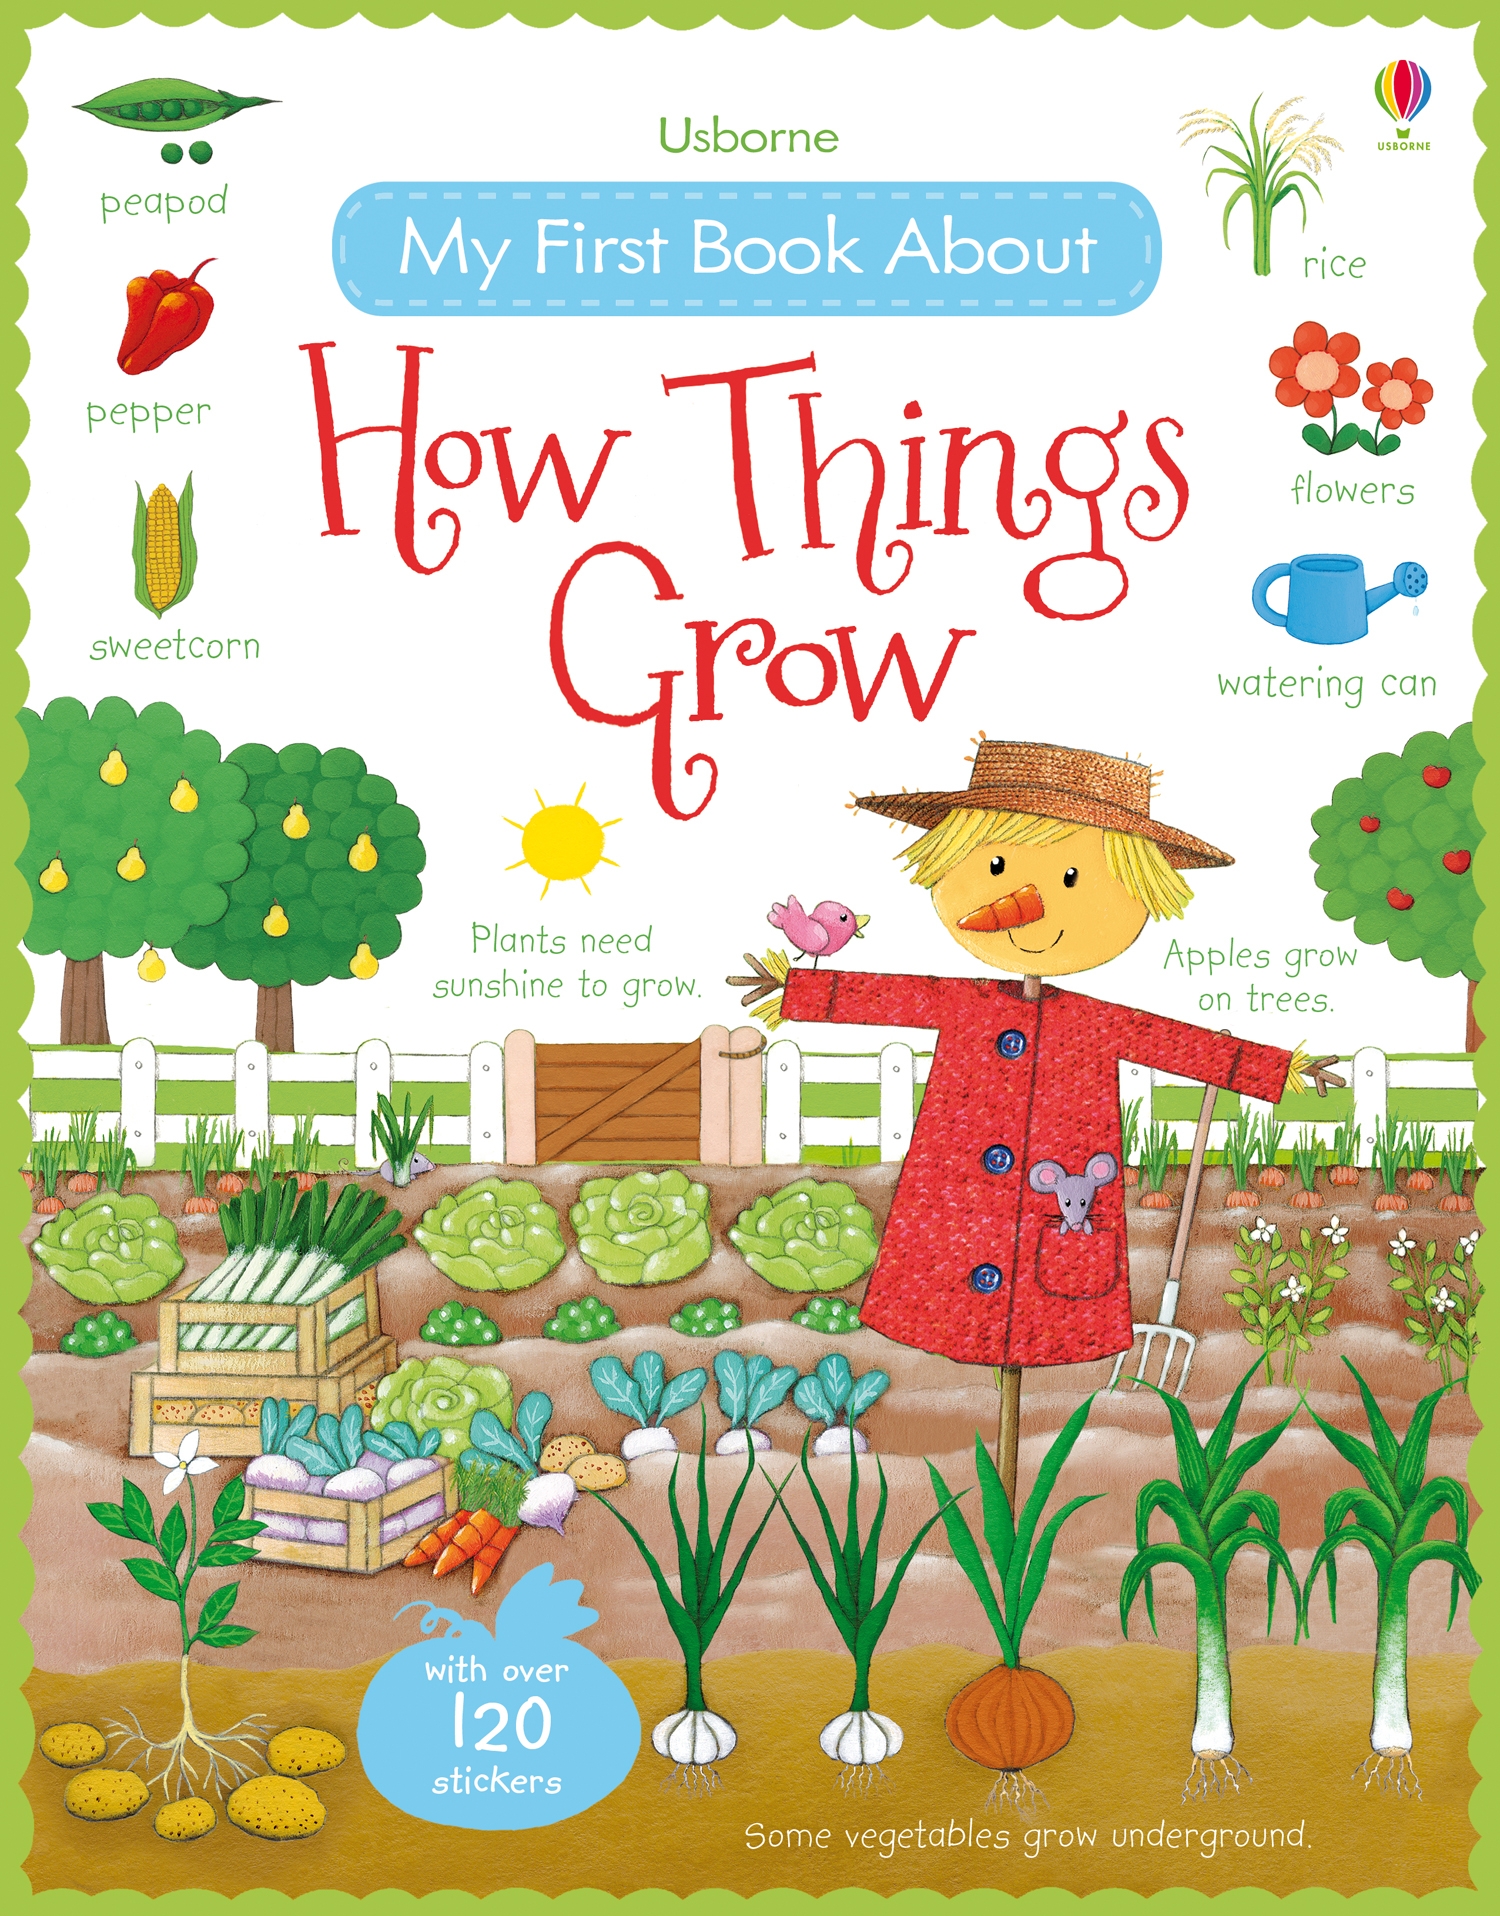 Be　Usborne　My　Book　Grow　Things　First　How　About　Curious